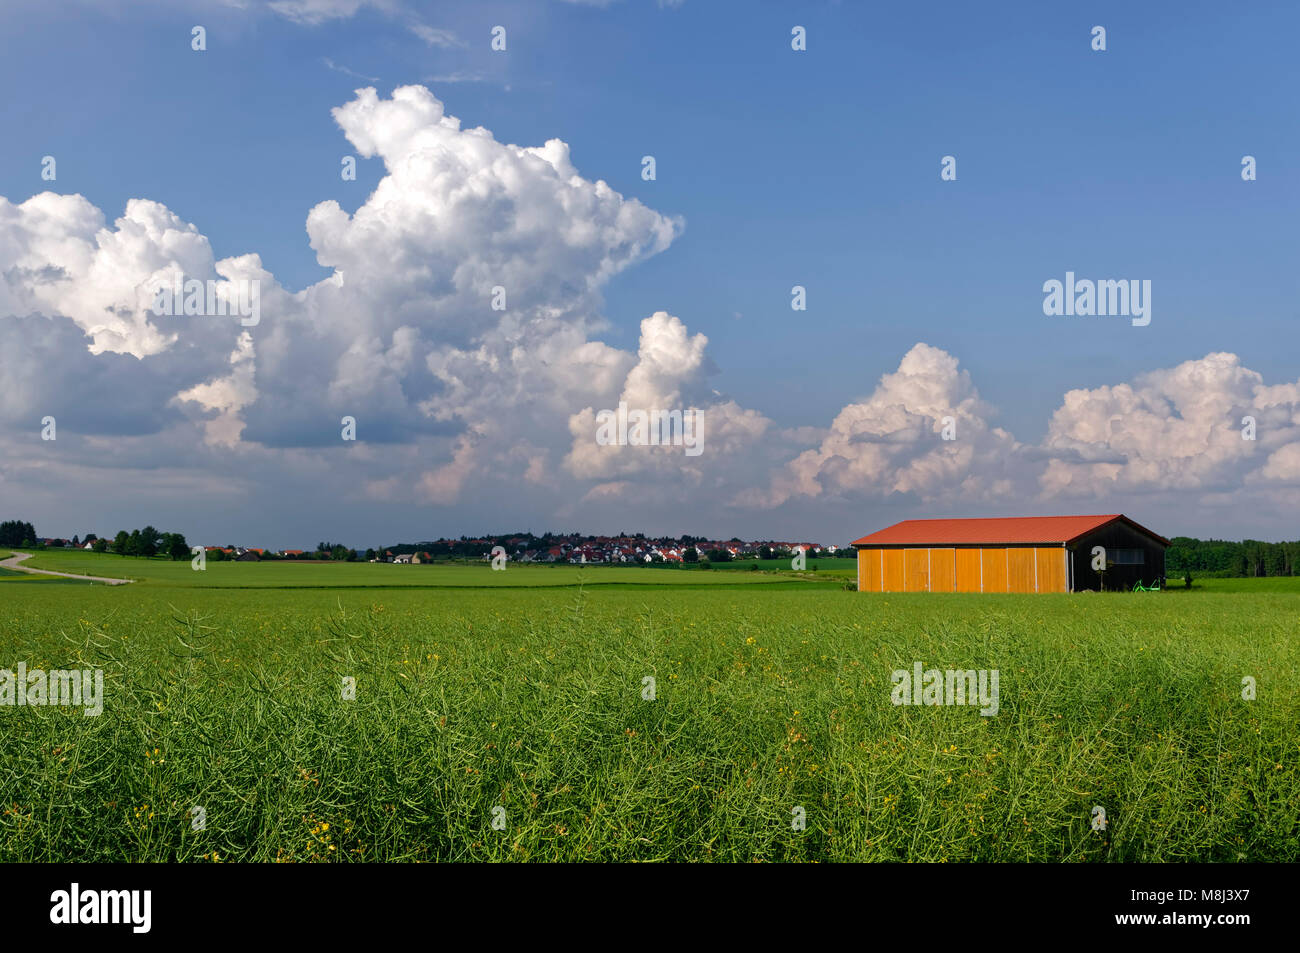 Barn and canola field finished blooming near Ennabeuren (part of Heroldstatt) on the Swabian Alps, Alb-Donau District, Baden-Württemberg, Germany Stock Photo